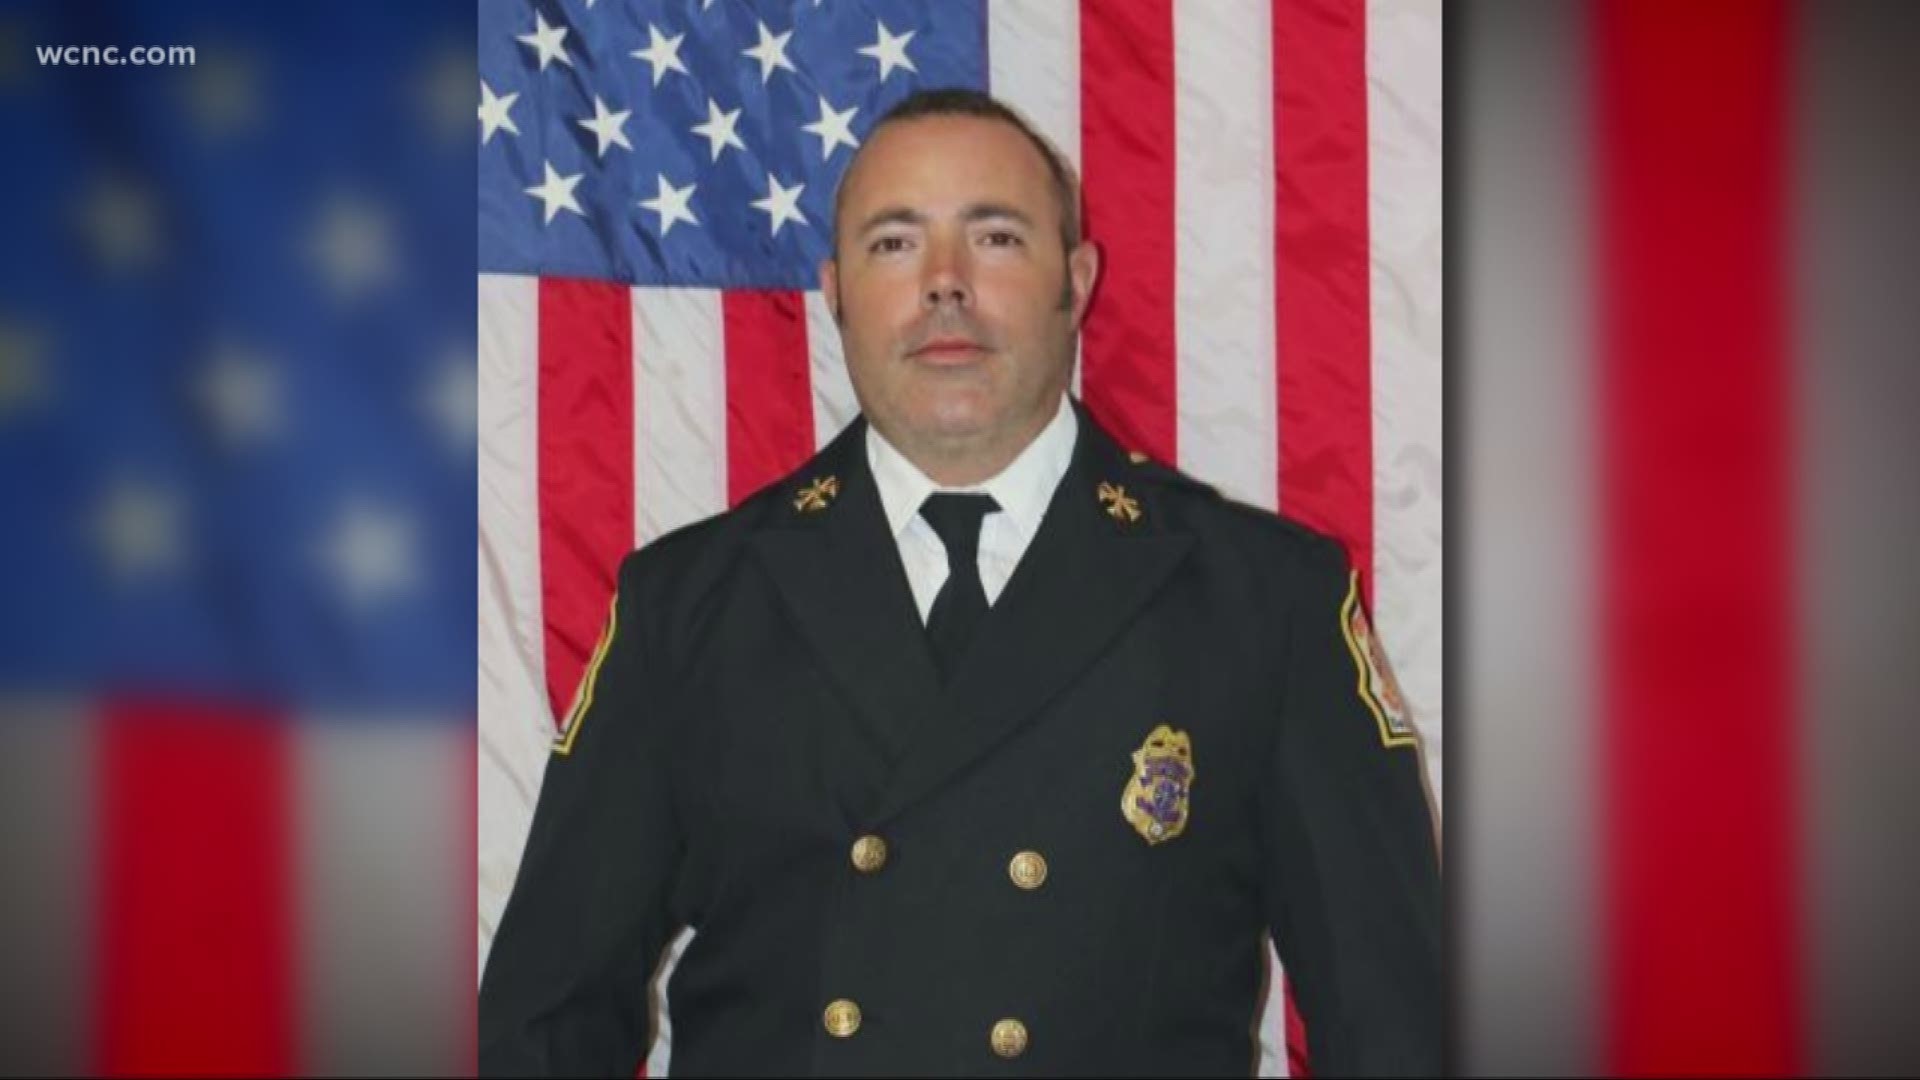 Firefighter Ray Elmore was involved in a crash this morning on a Charlotte highway. He was taken to a trauma center where his left leg was amputated.